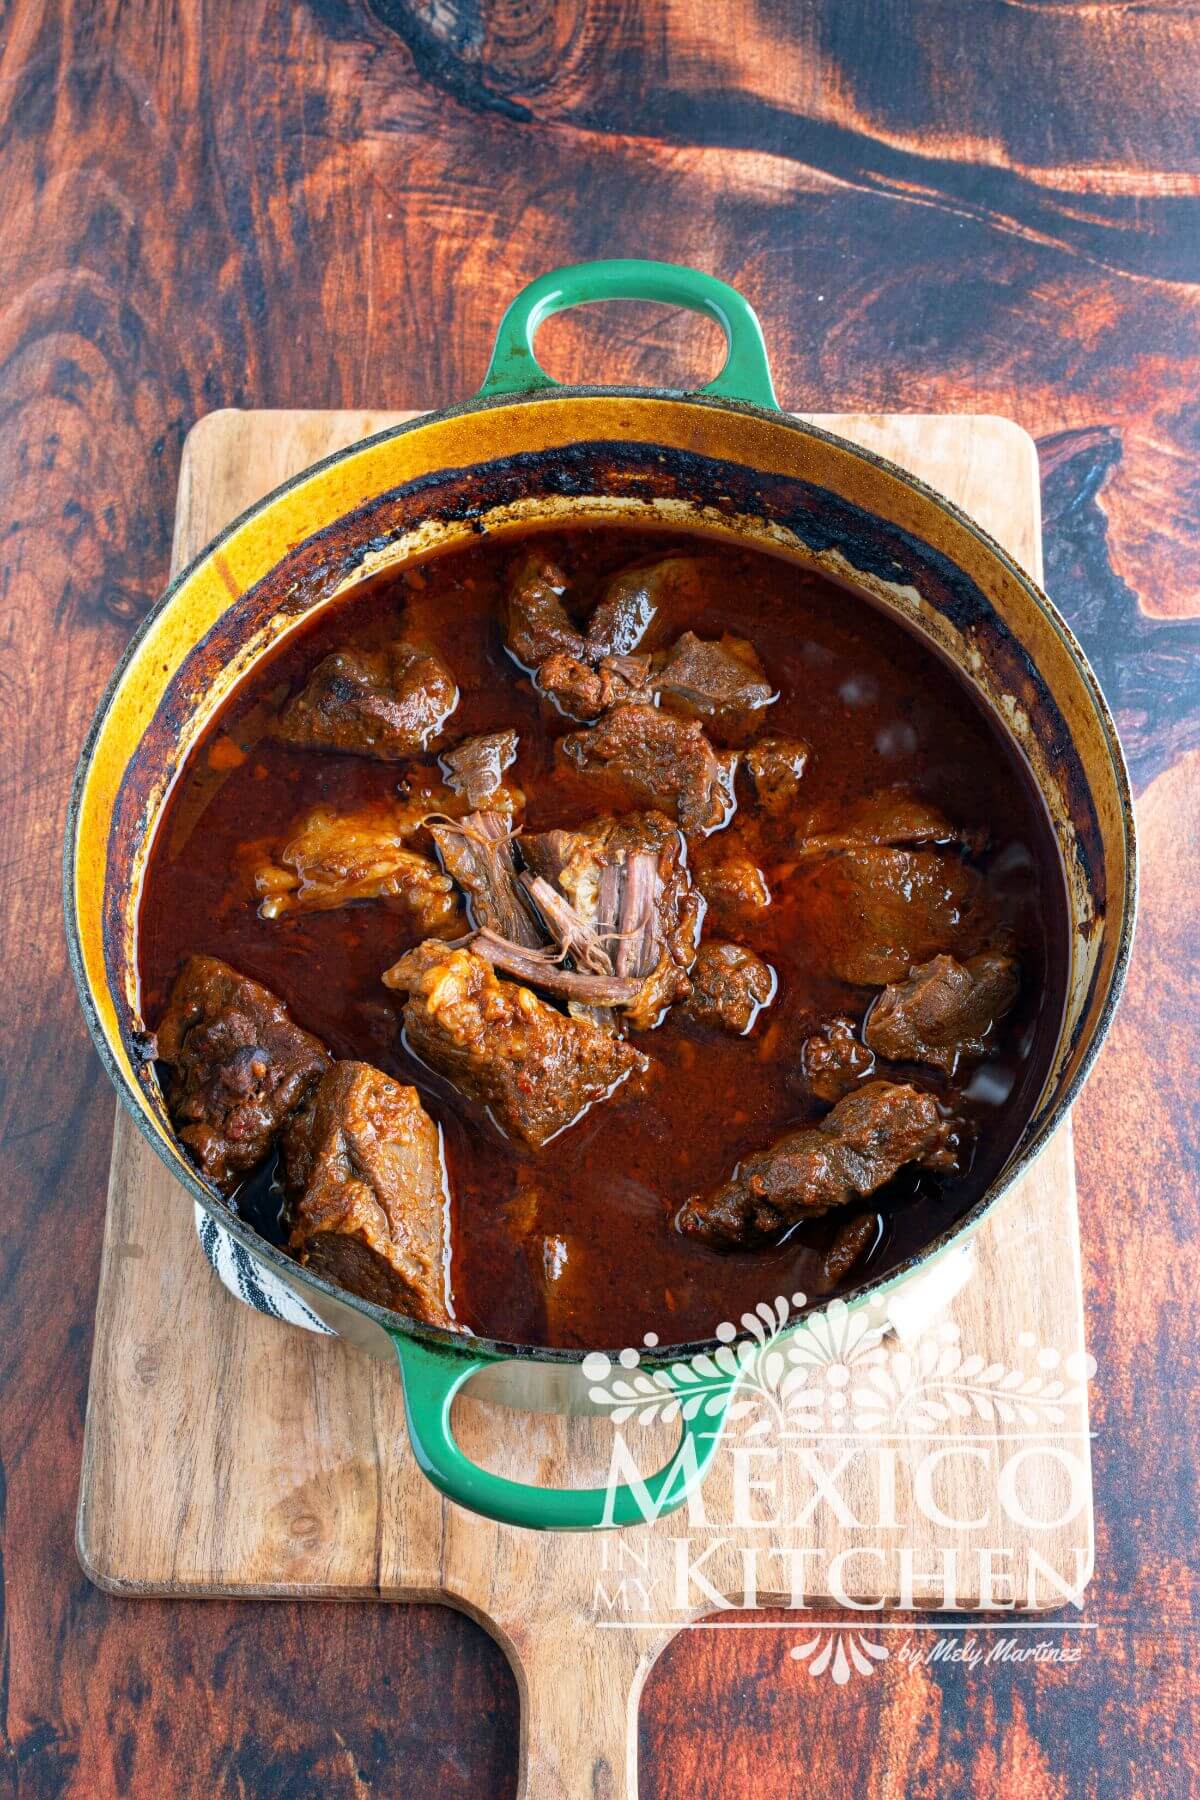 Cooked birria in a cast iron pot